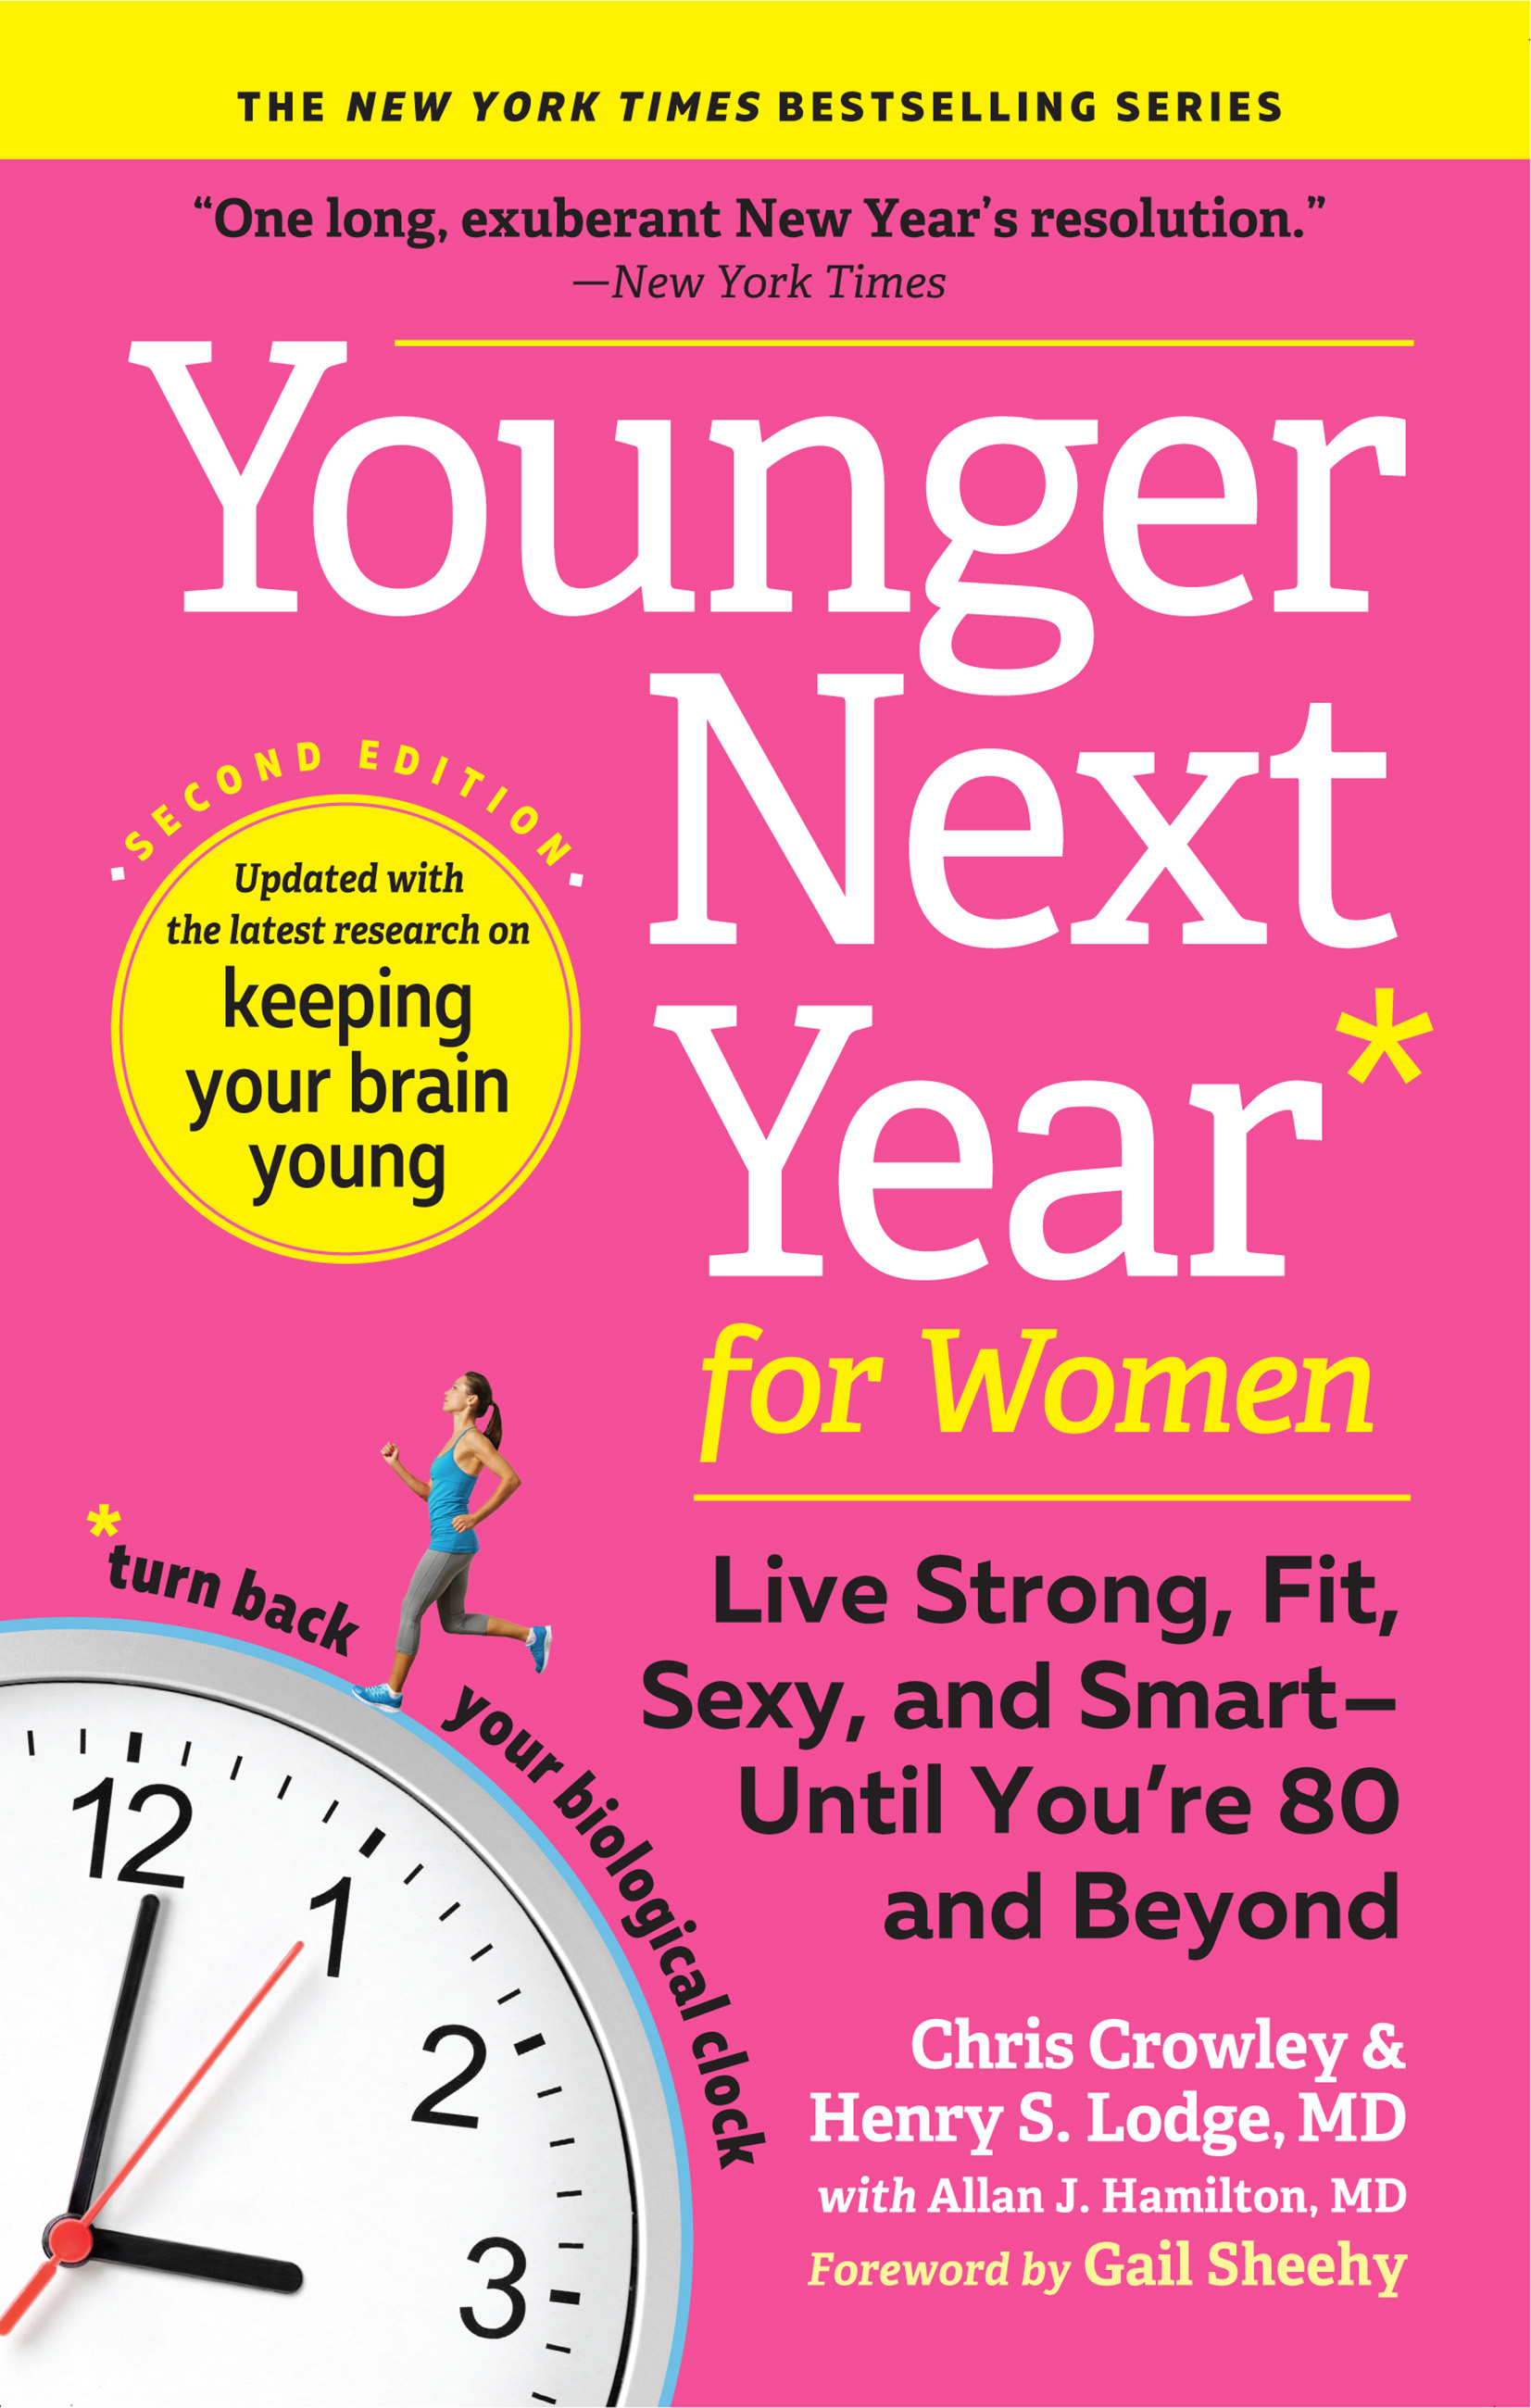 Younger next year for women live strong, fit, and sexy -- until you're 80 and beyond cover image